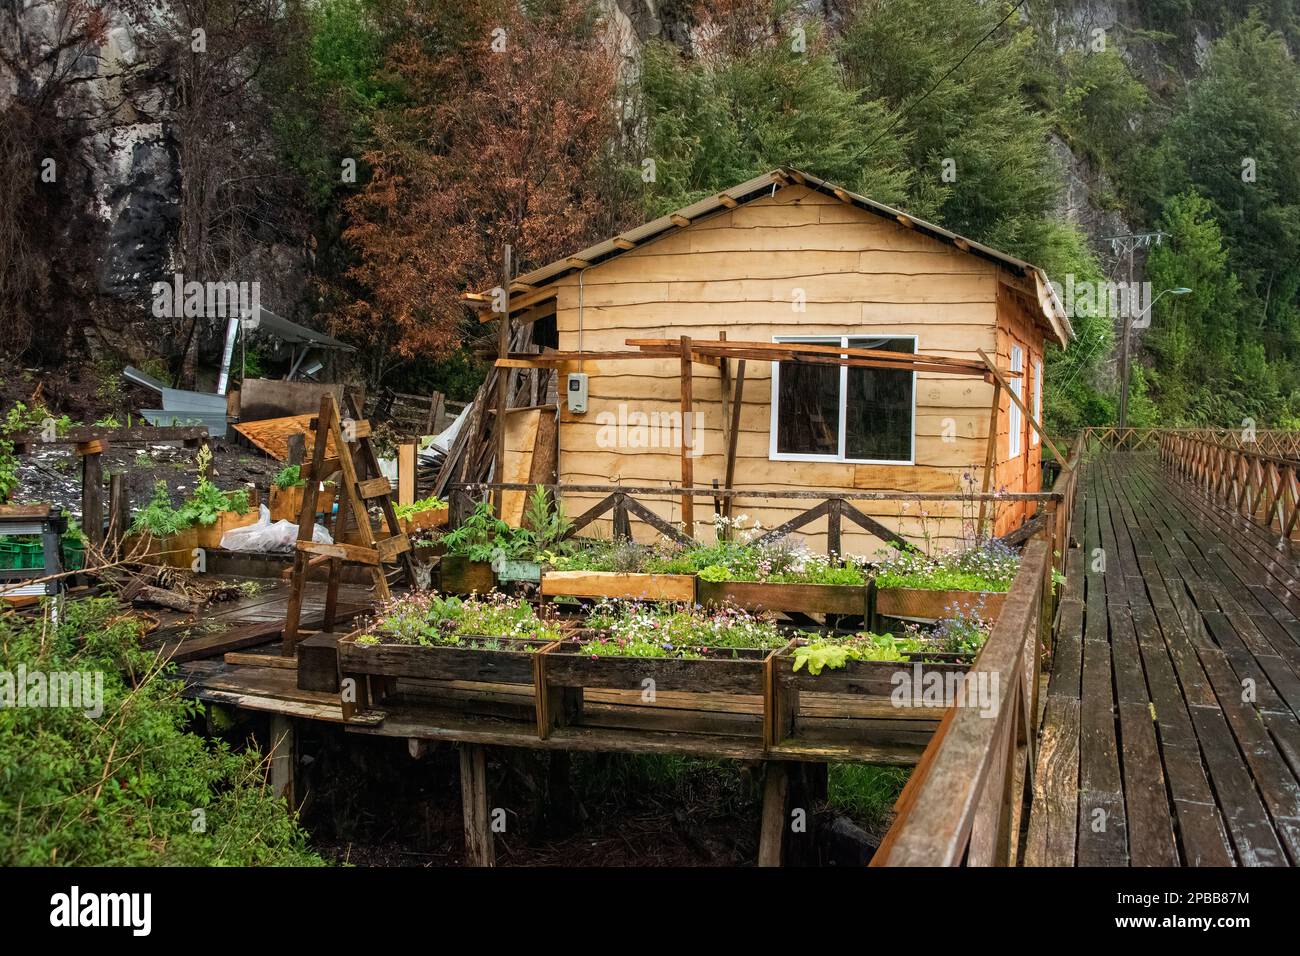 Tortel stilt house and boardwalk with flower boxes, and burned adjacent house, Patagonia, Chile Stock Photo